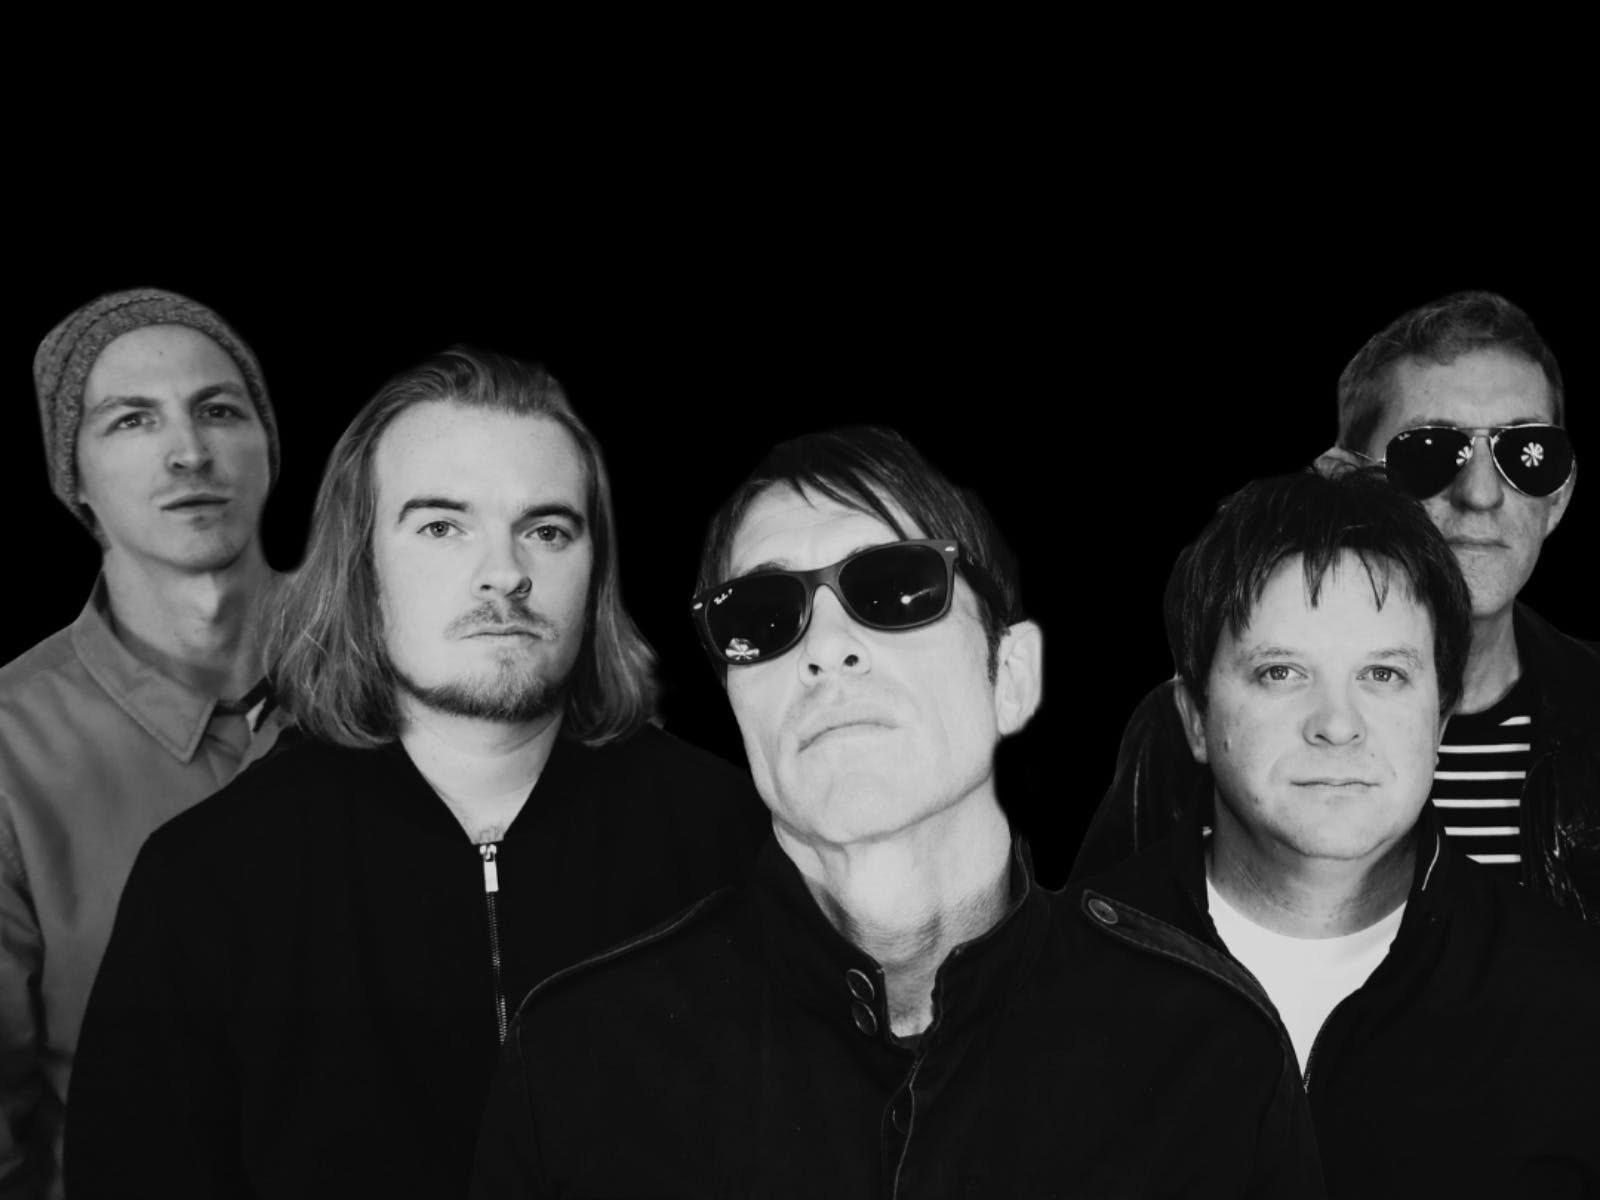 Wonderwall Oasis Tribute Band Photo in black and white. Two of the five members are wearing glasses